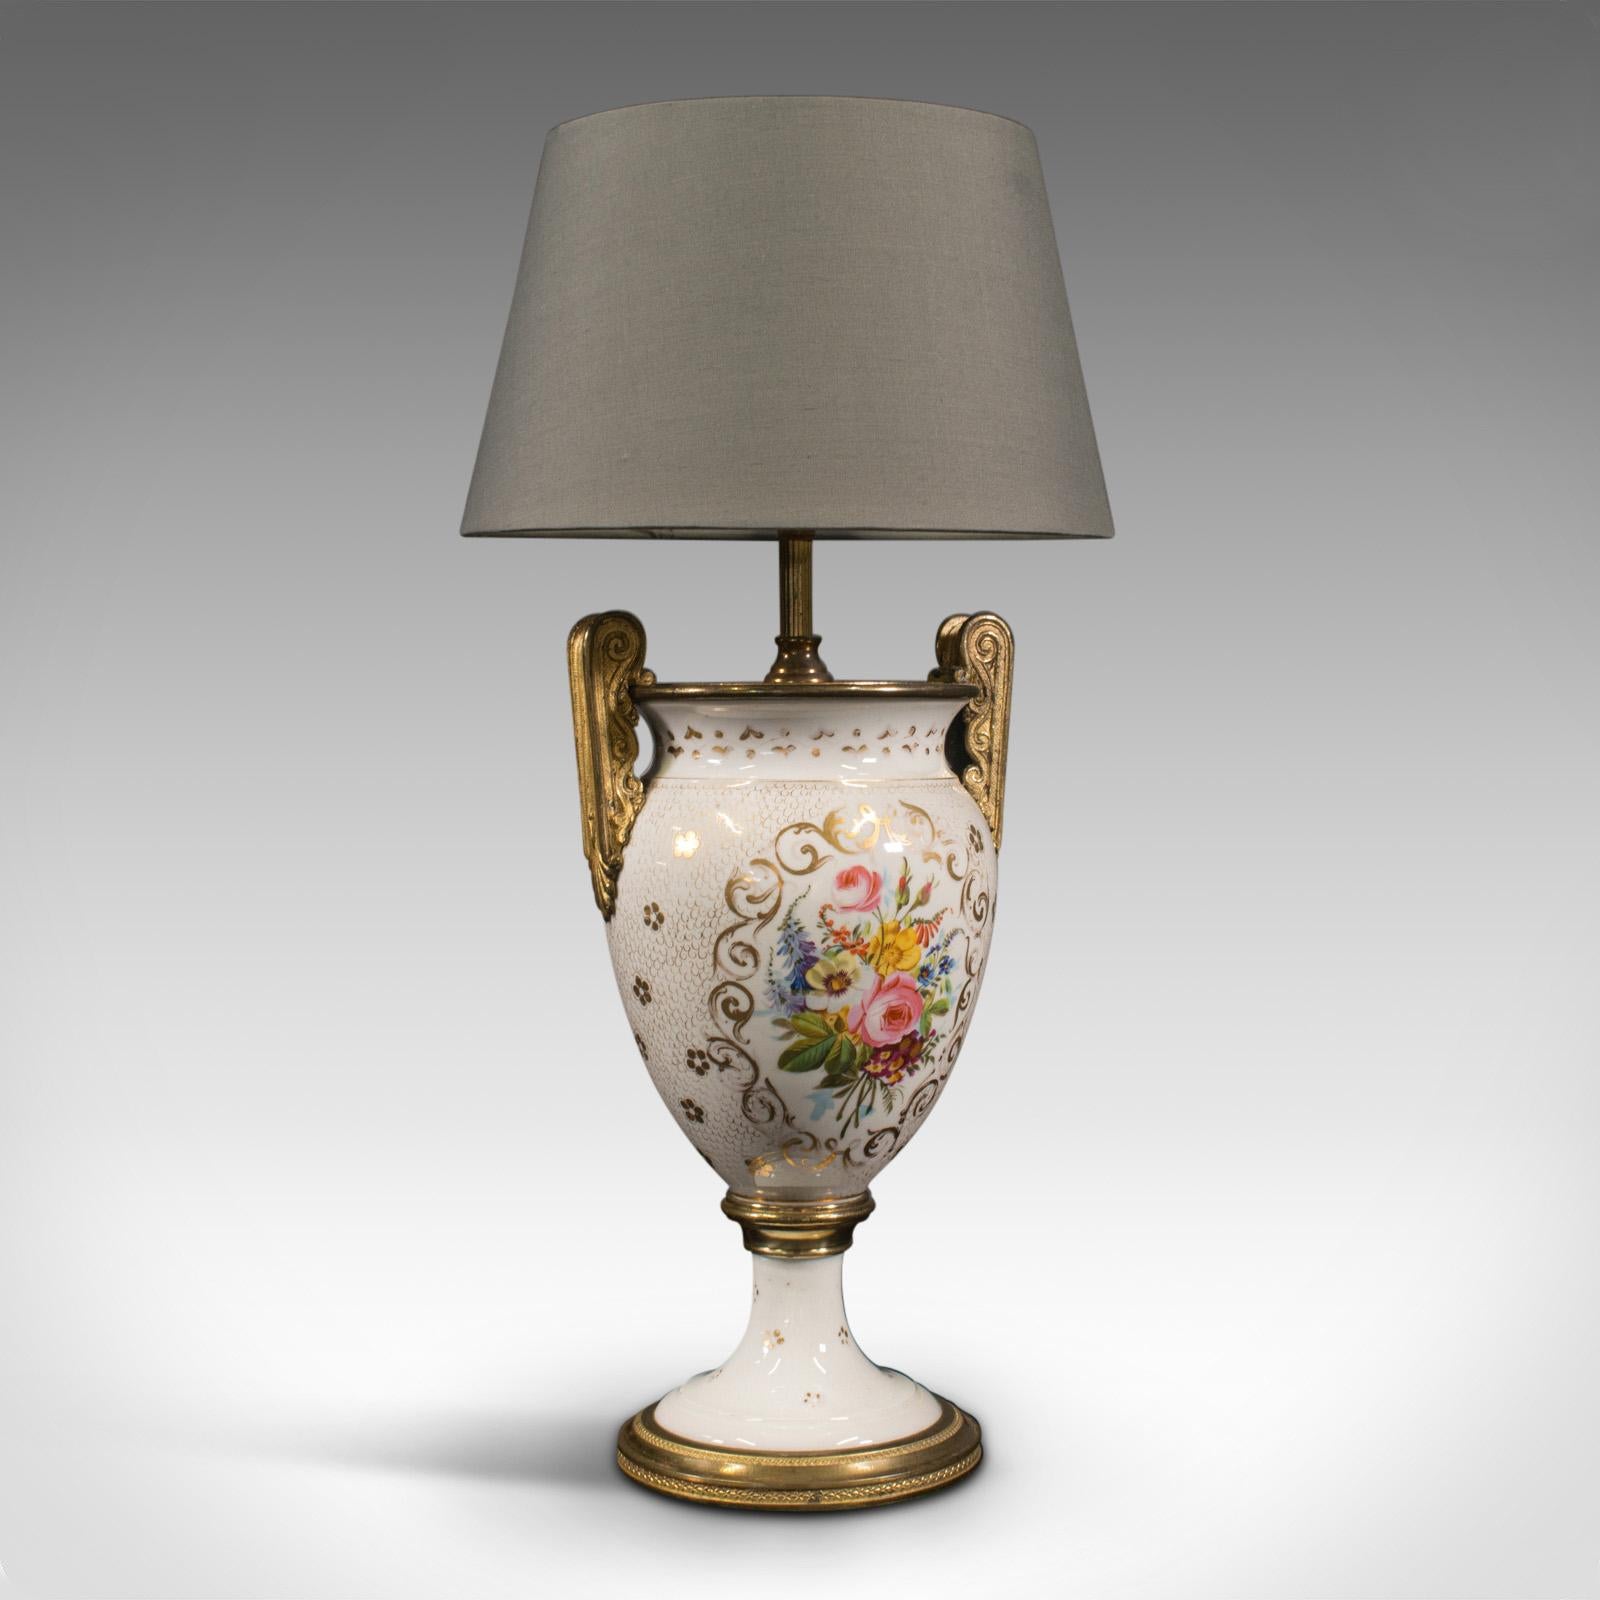 This is a vintage decorative table lamp. A French, ceramic urn-shaped ornamental light, dating to the late 20th century, circa 1970.

Pleasingly decorative lamp, with classic foliate motif
Displays a desirable aged patina and in good